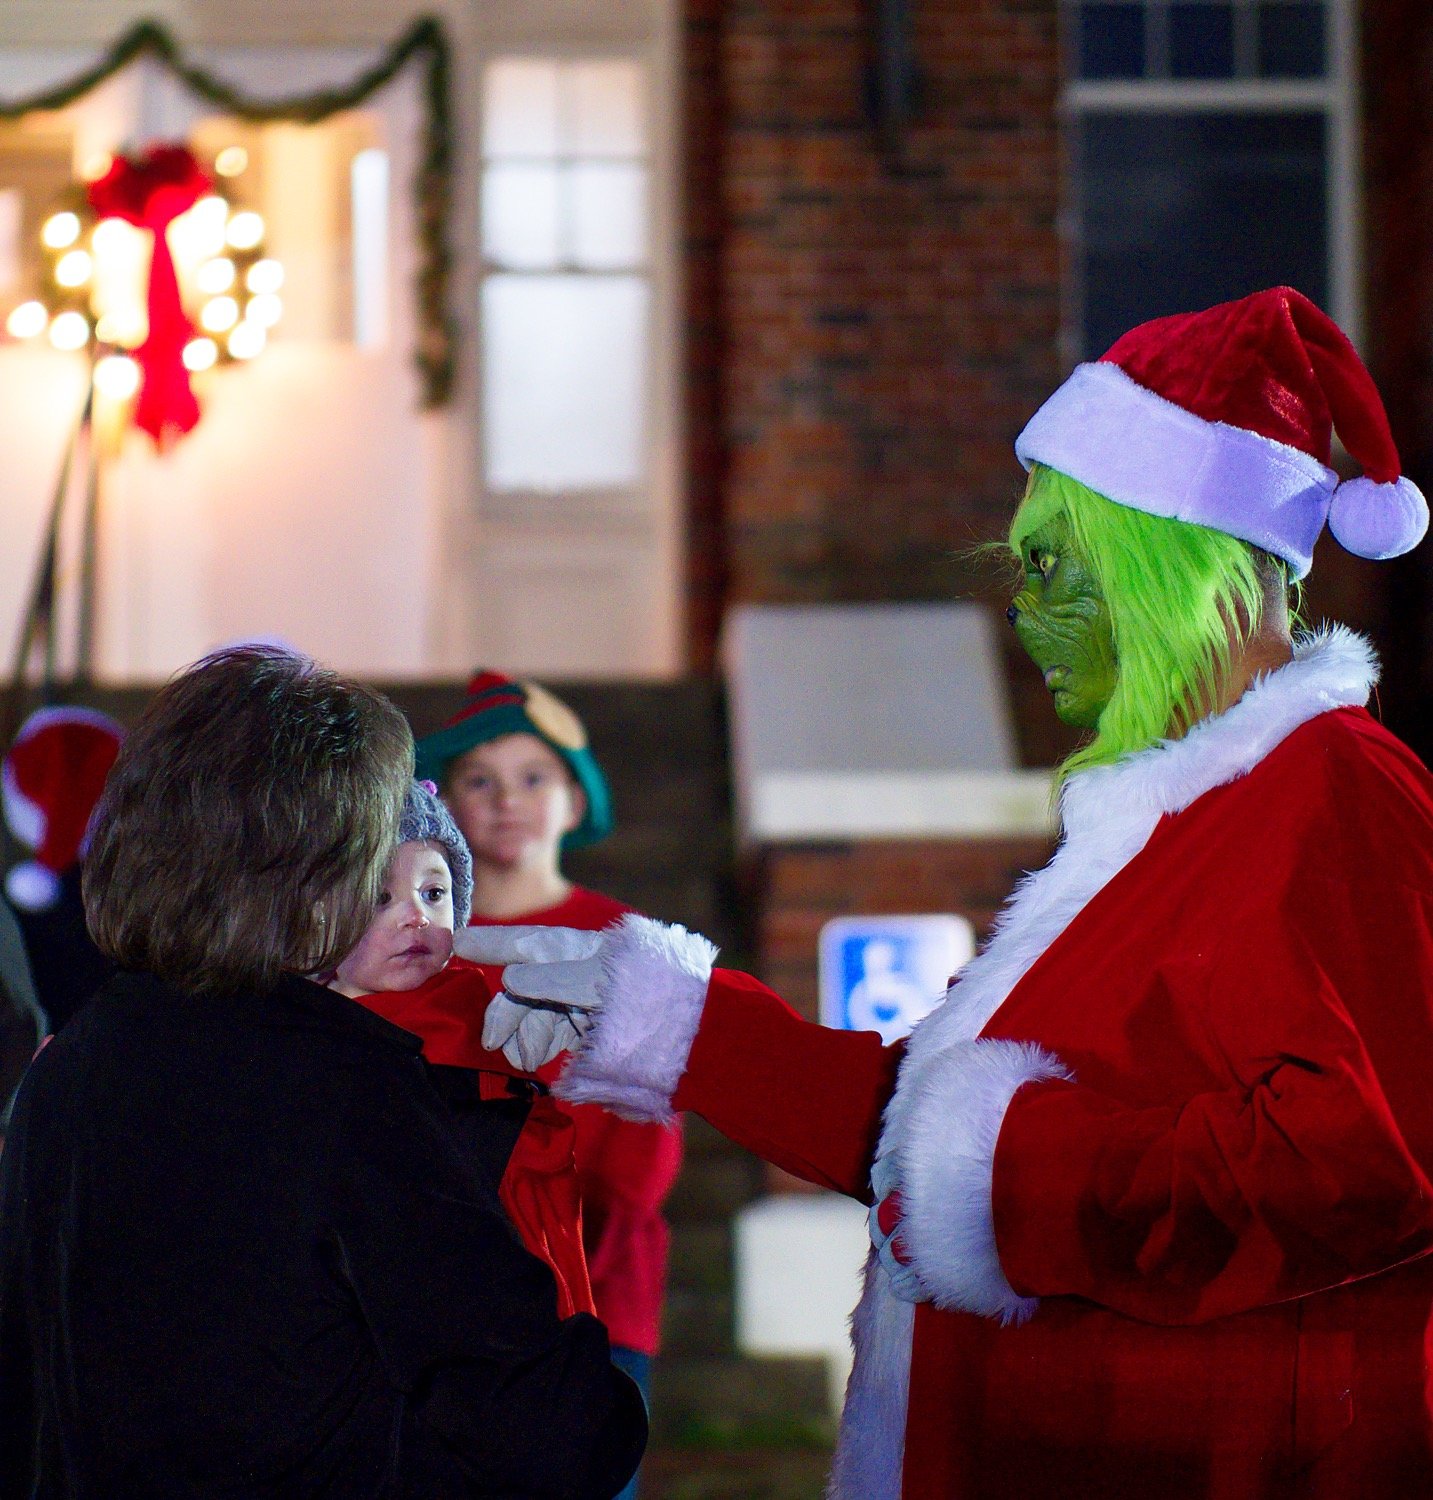 The Grinch has become a fixture at gatherings in December and Quitman's Hometown Christmas event was no exception. [see more of the festivities]